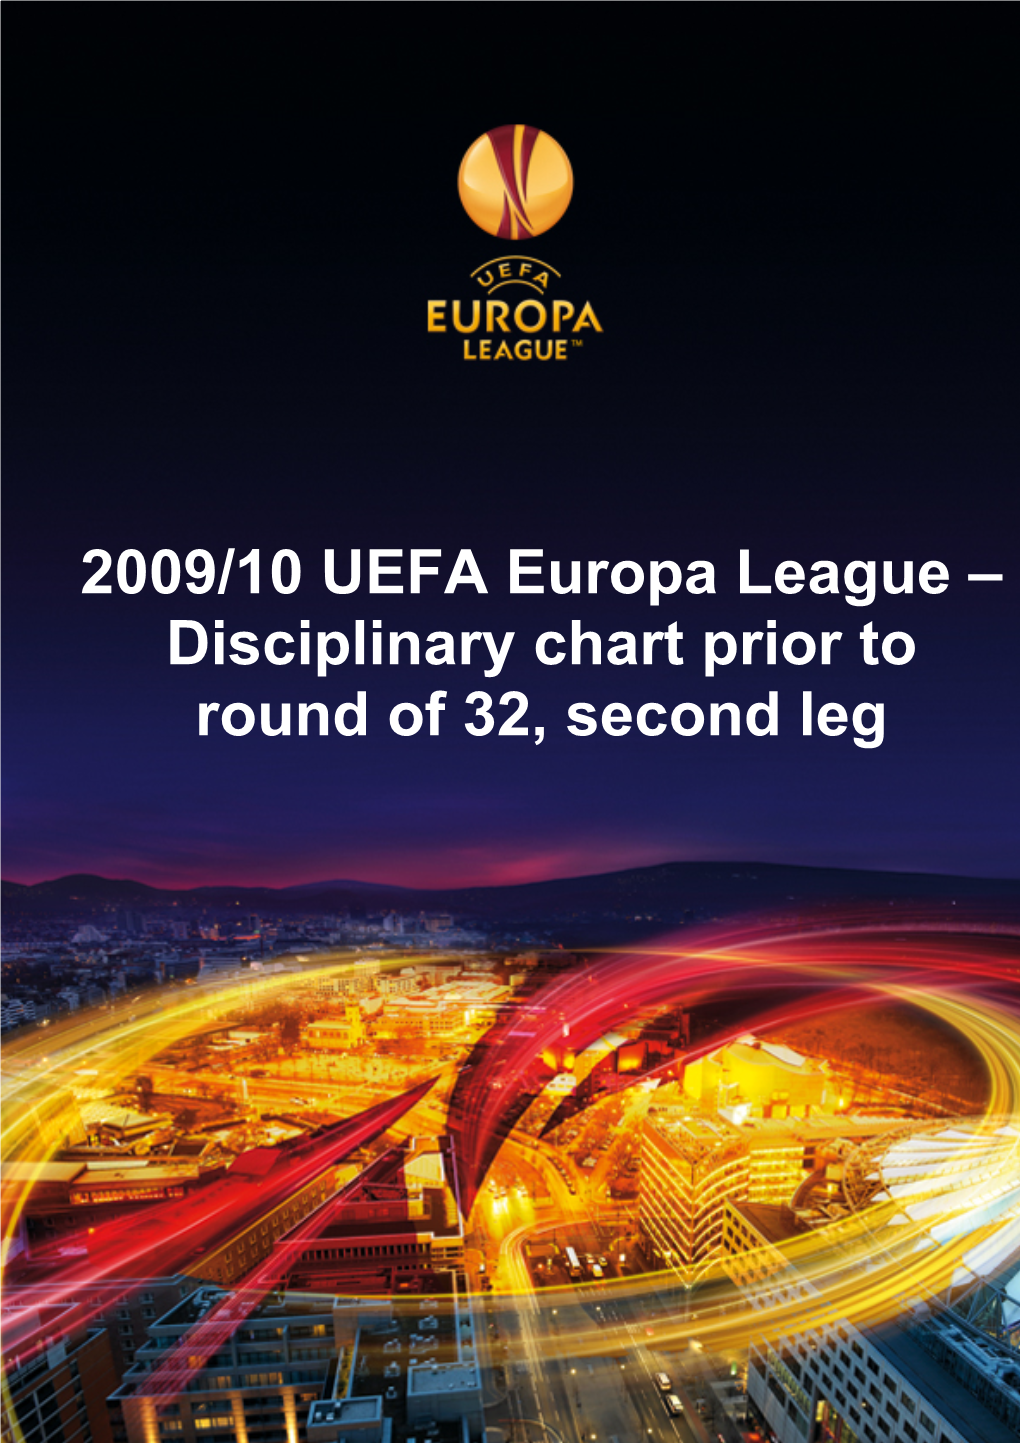 2009/10 UEFA Europa League Disciplinary Chart Prior to Round of 32, Second